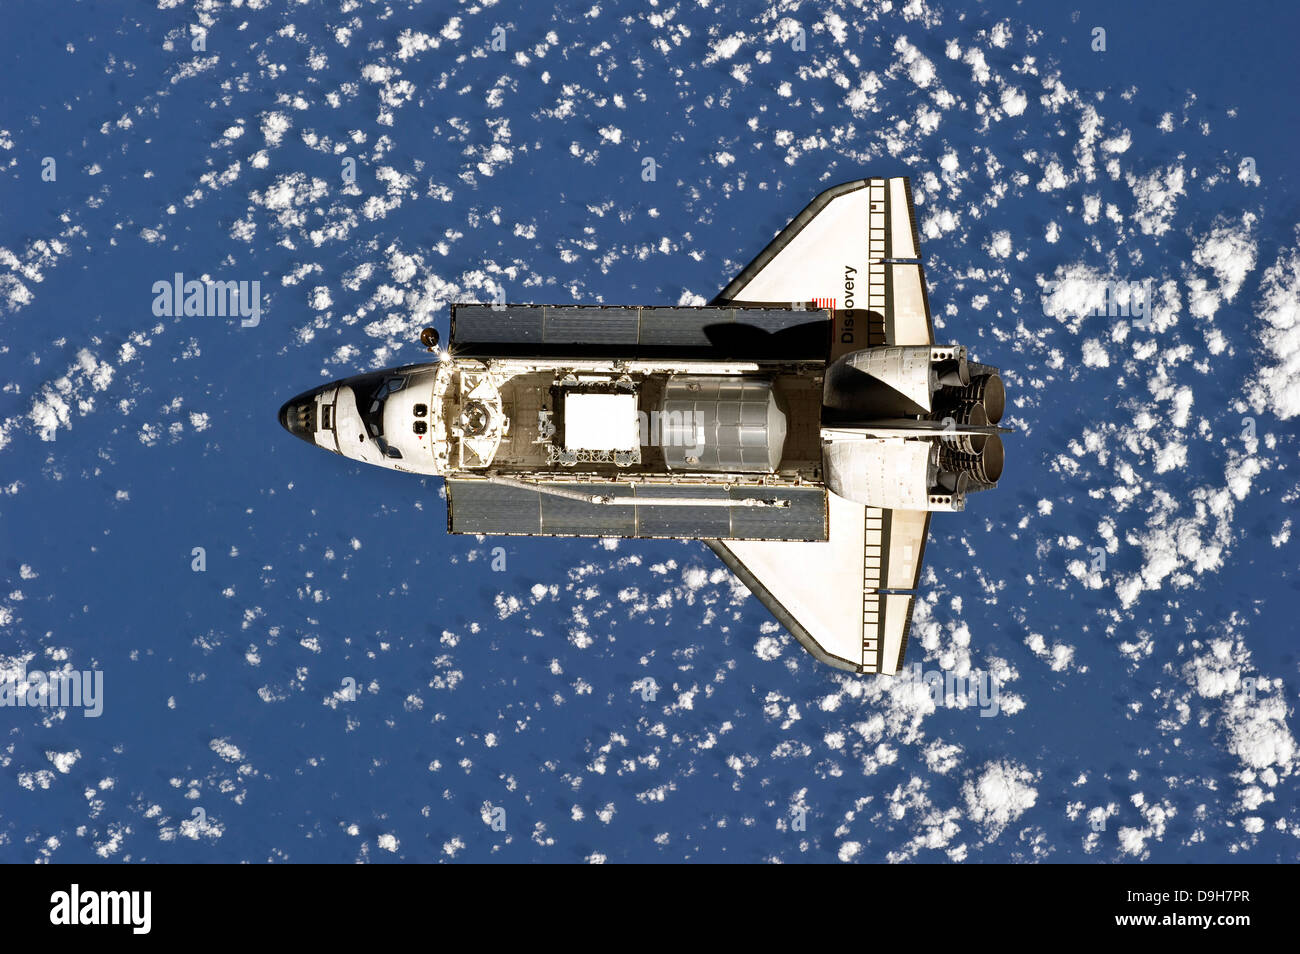 Lo Space Shuttle Discovery Foto Stock